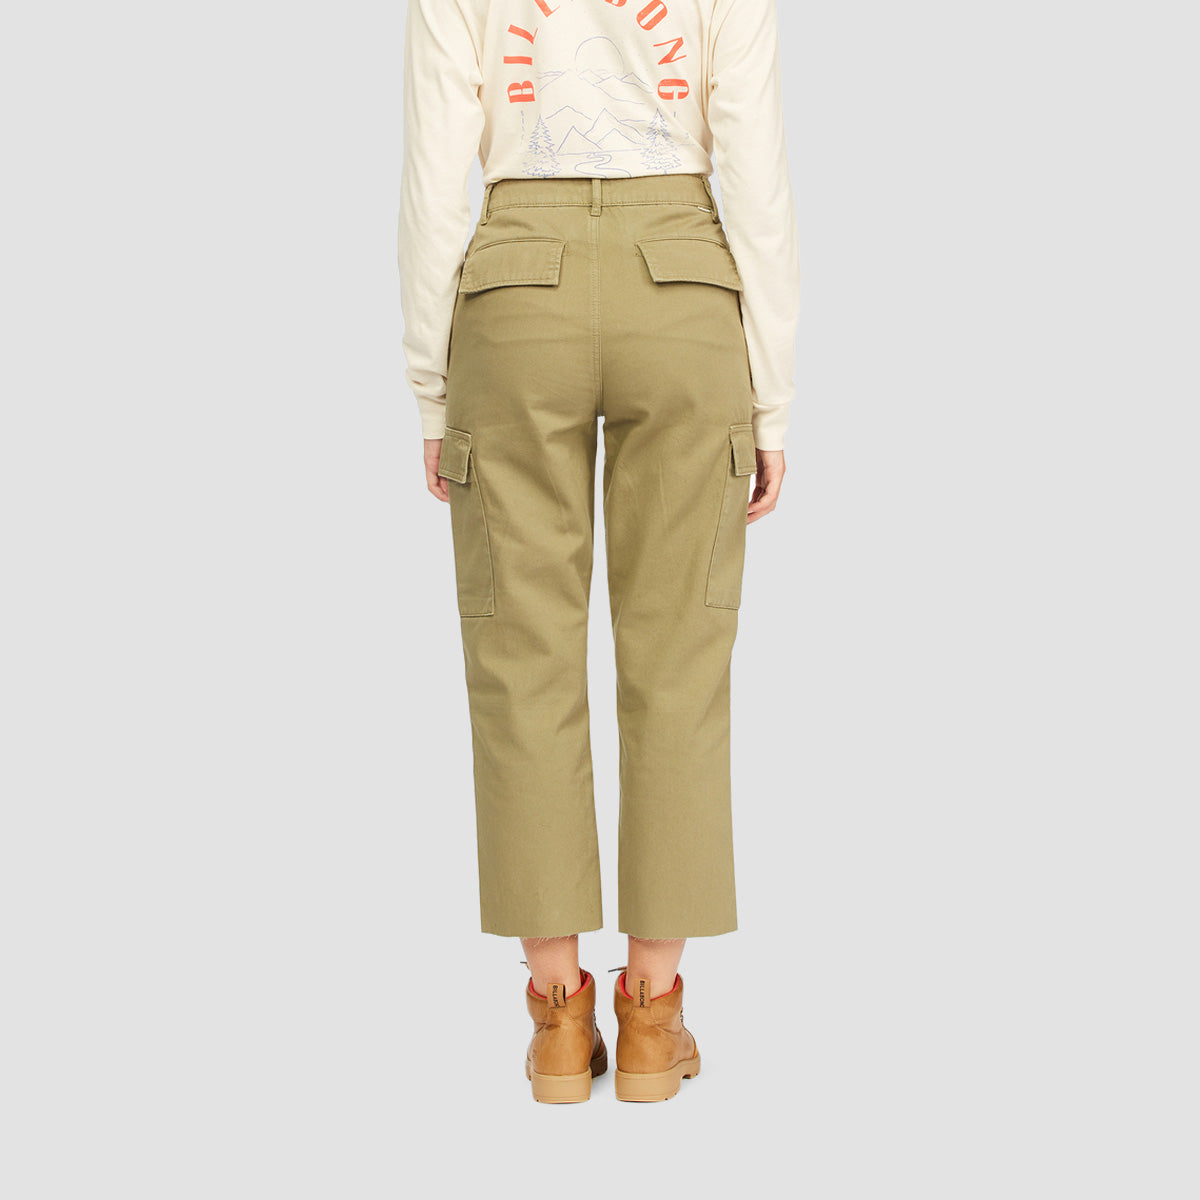 Billabong Heading Out Trousers Sage - Womens